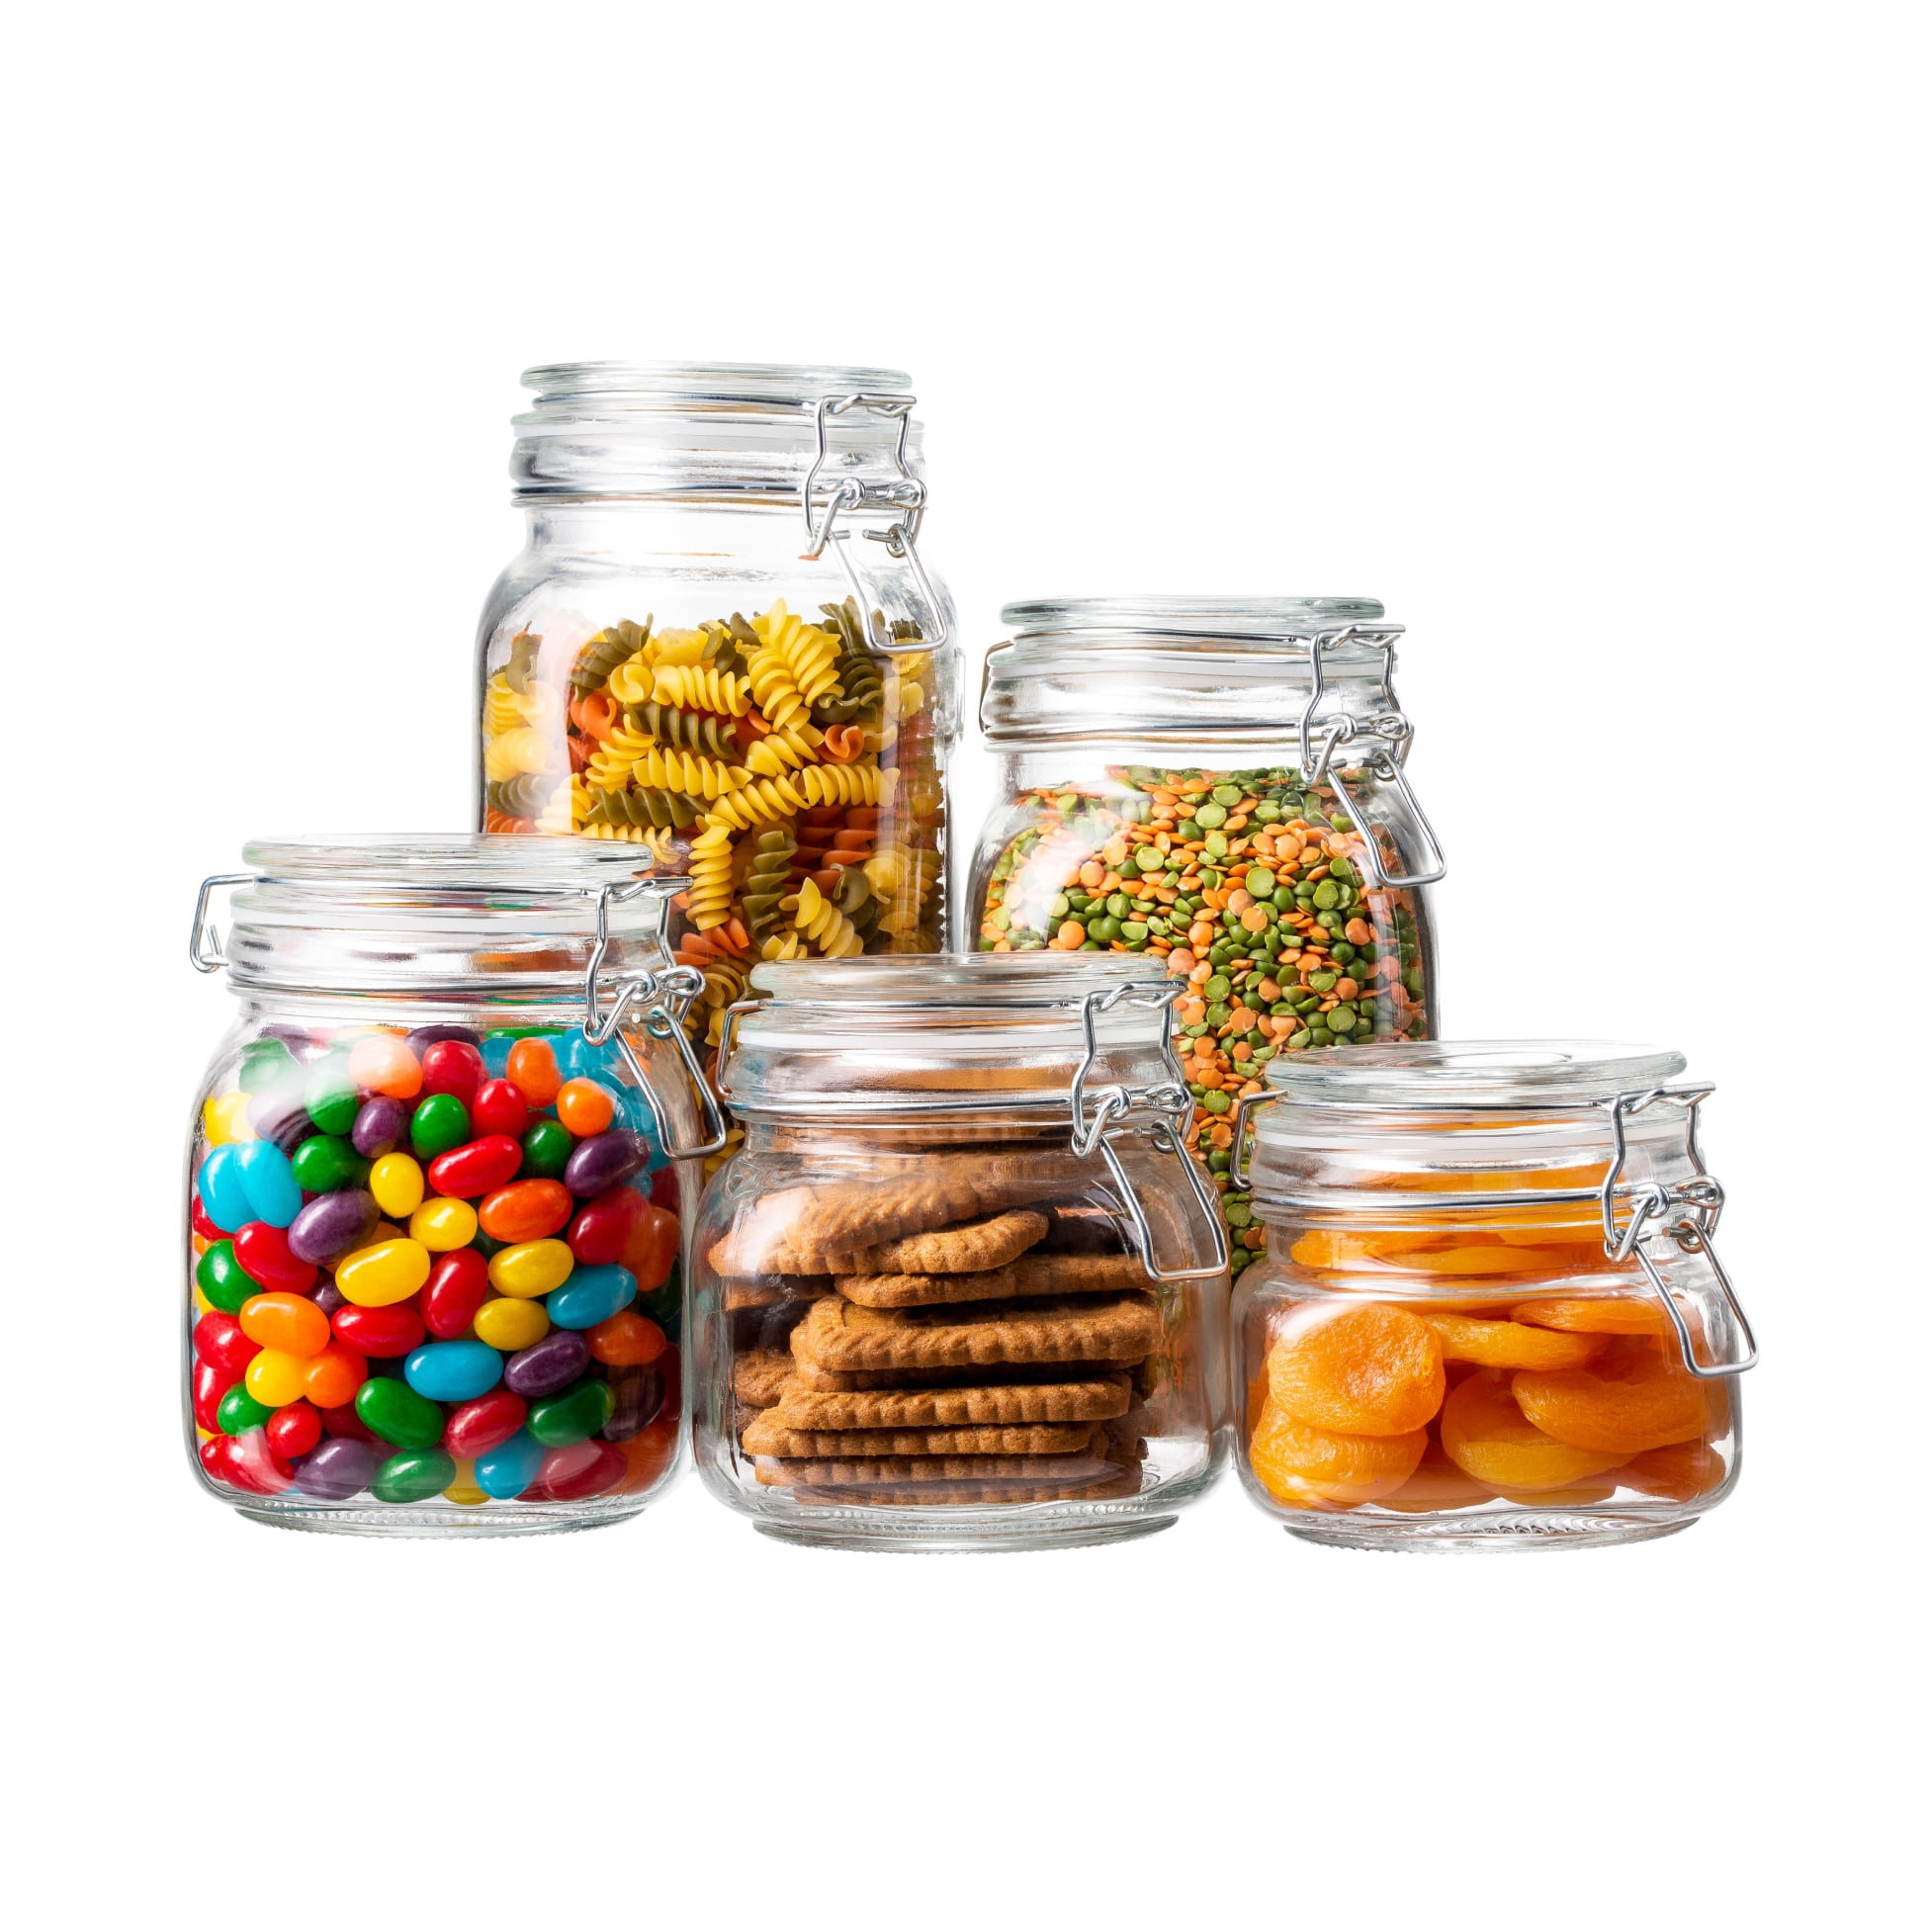 Berkware Mini Glass Jar Set and Air Tight Sealable Containers for Kitchen and Pantry Organization, Clear